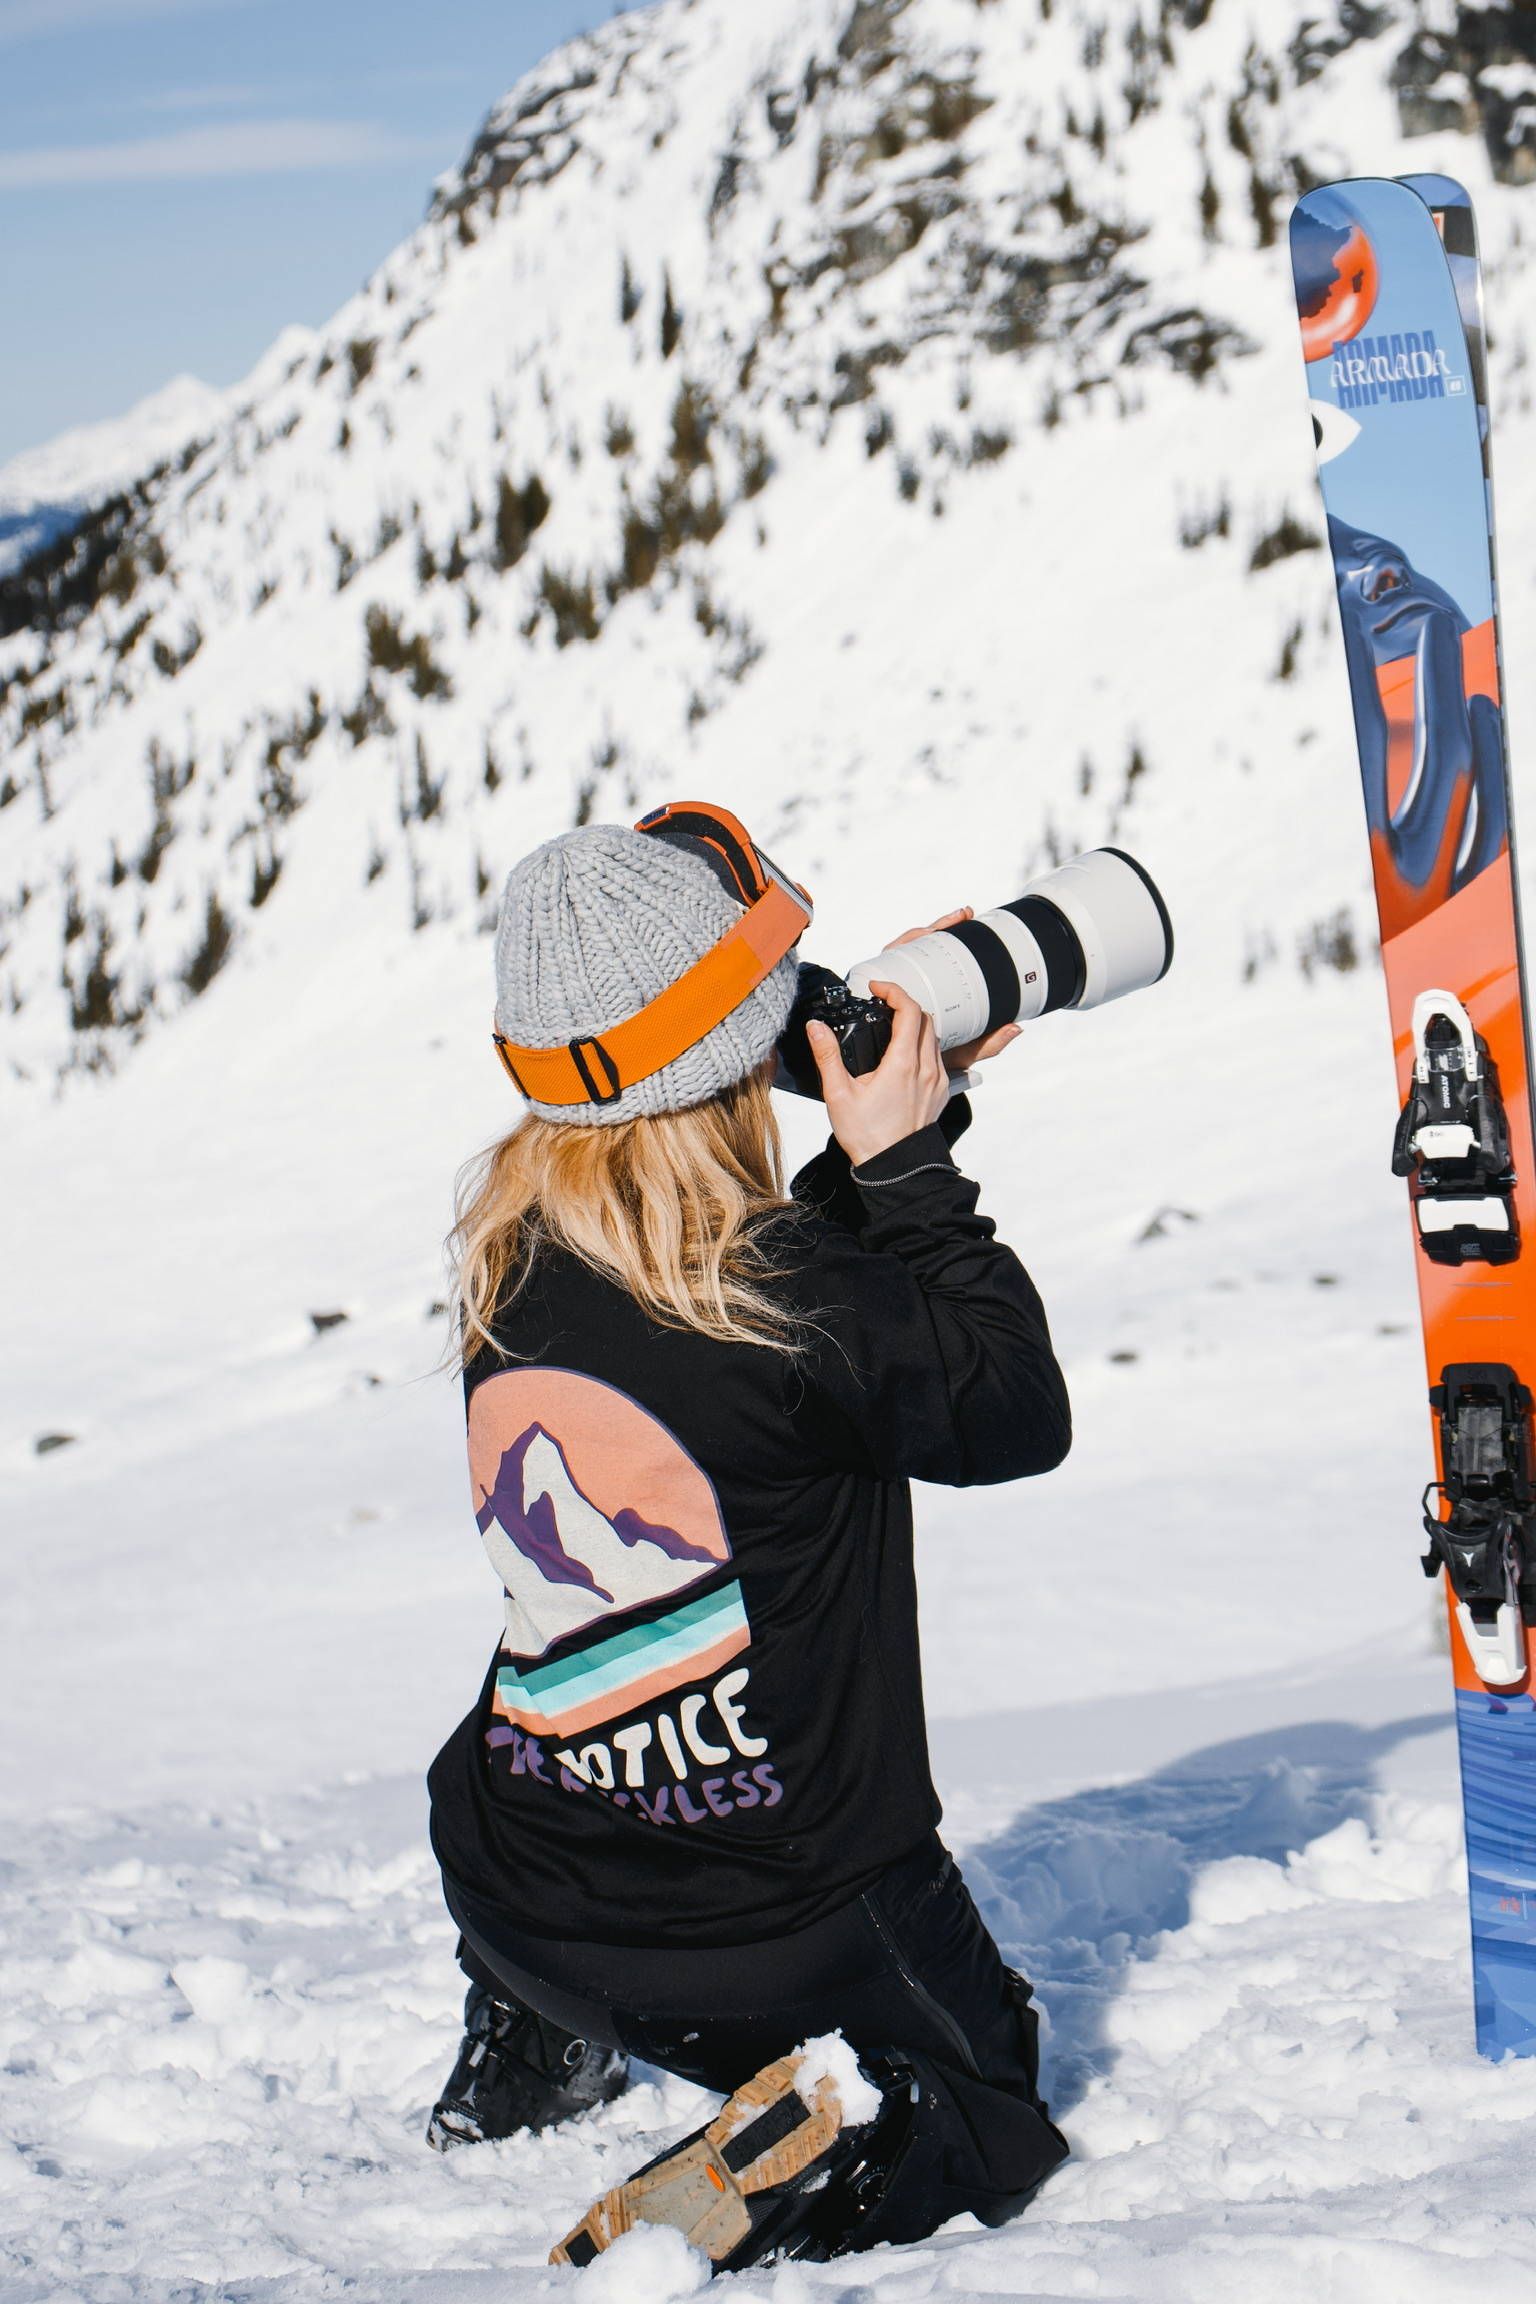 A woman kneeling down on the snow photographing the mountains with skis beside her